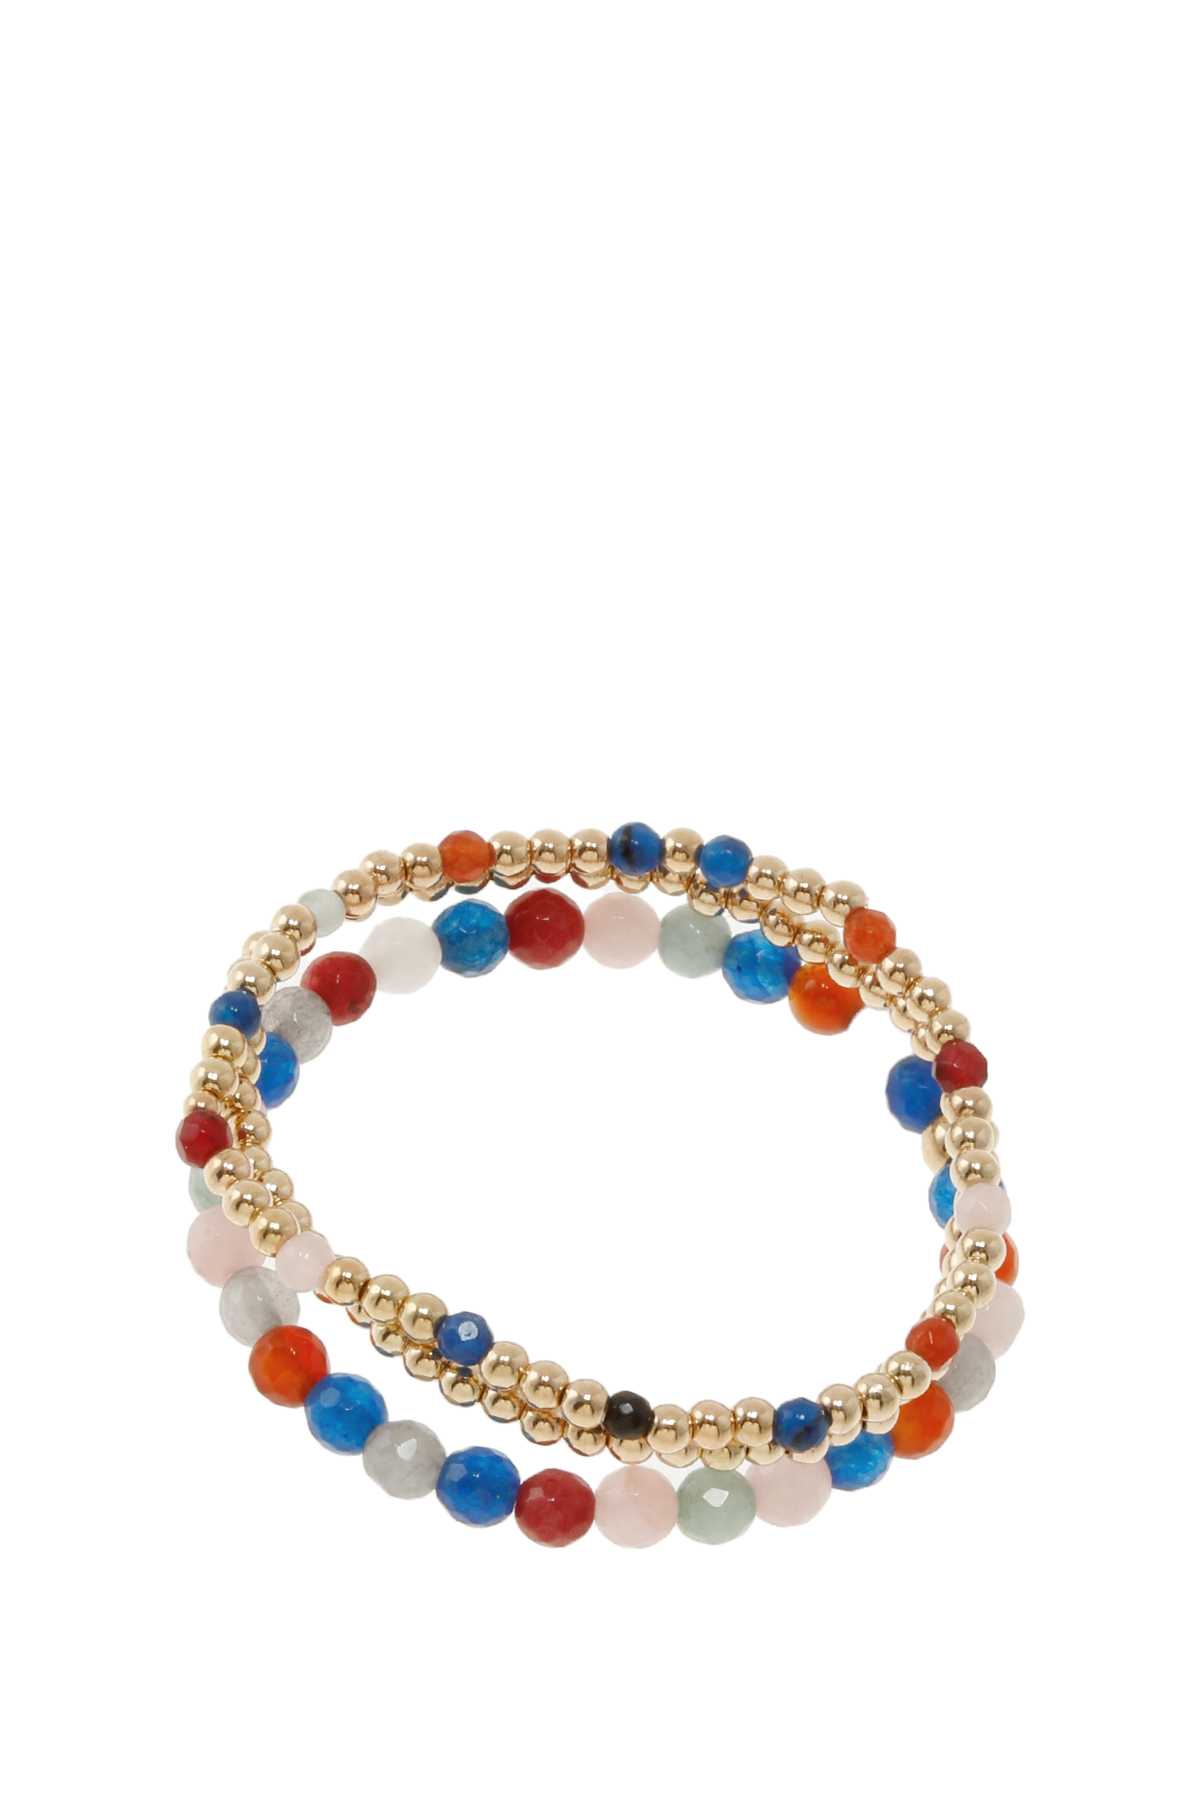 Natural Stone and Metal Beads Stretchable Bracelet